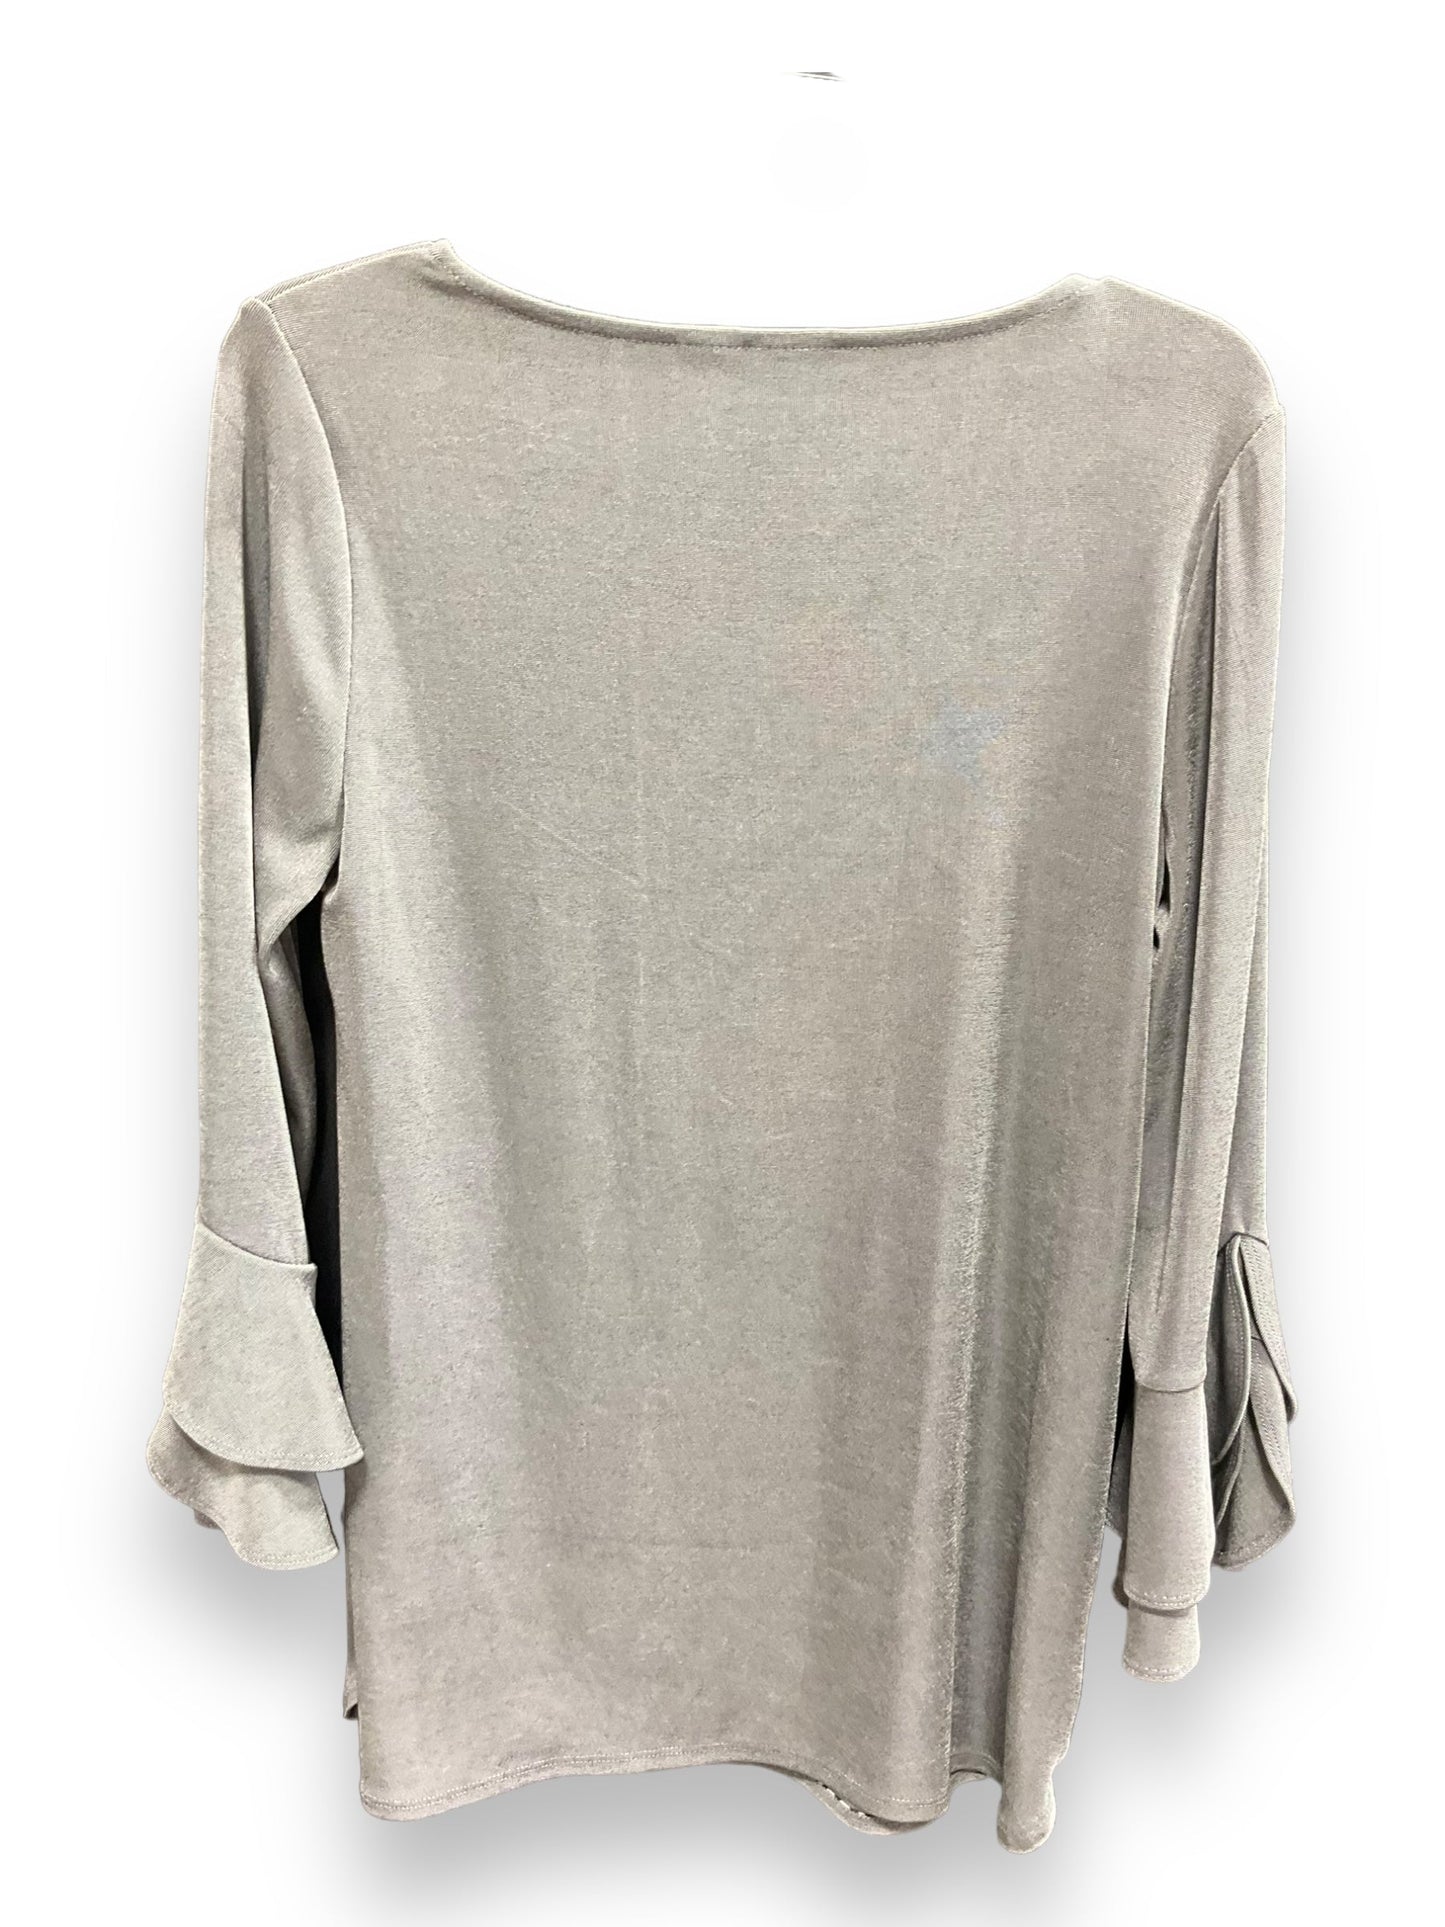 Silver Top Long Sleeve Chicos, Size 4